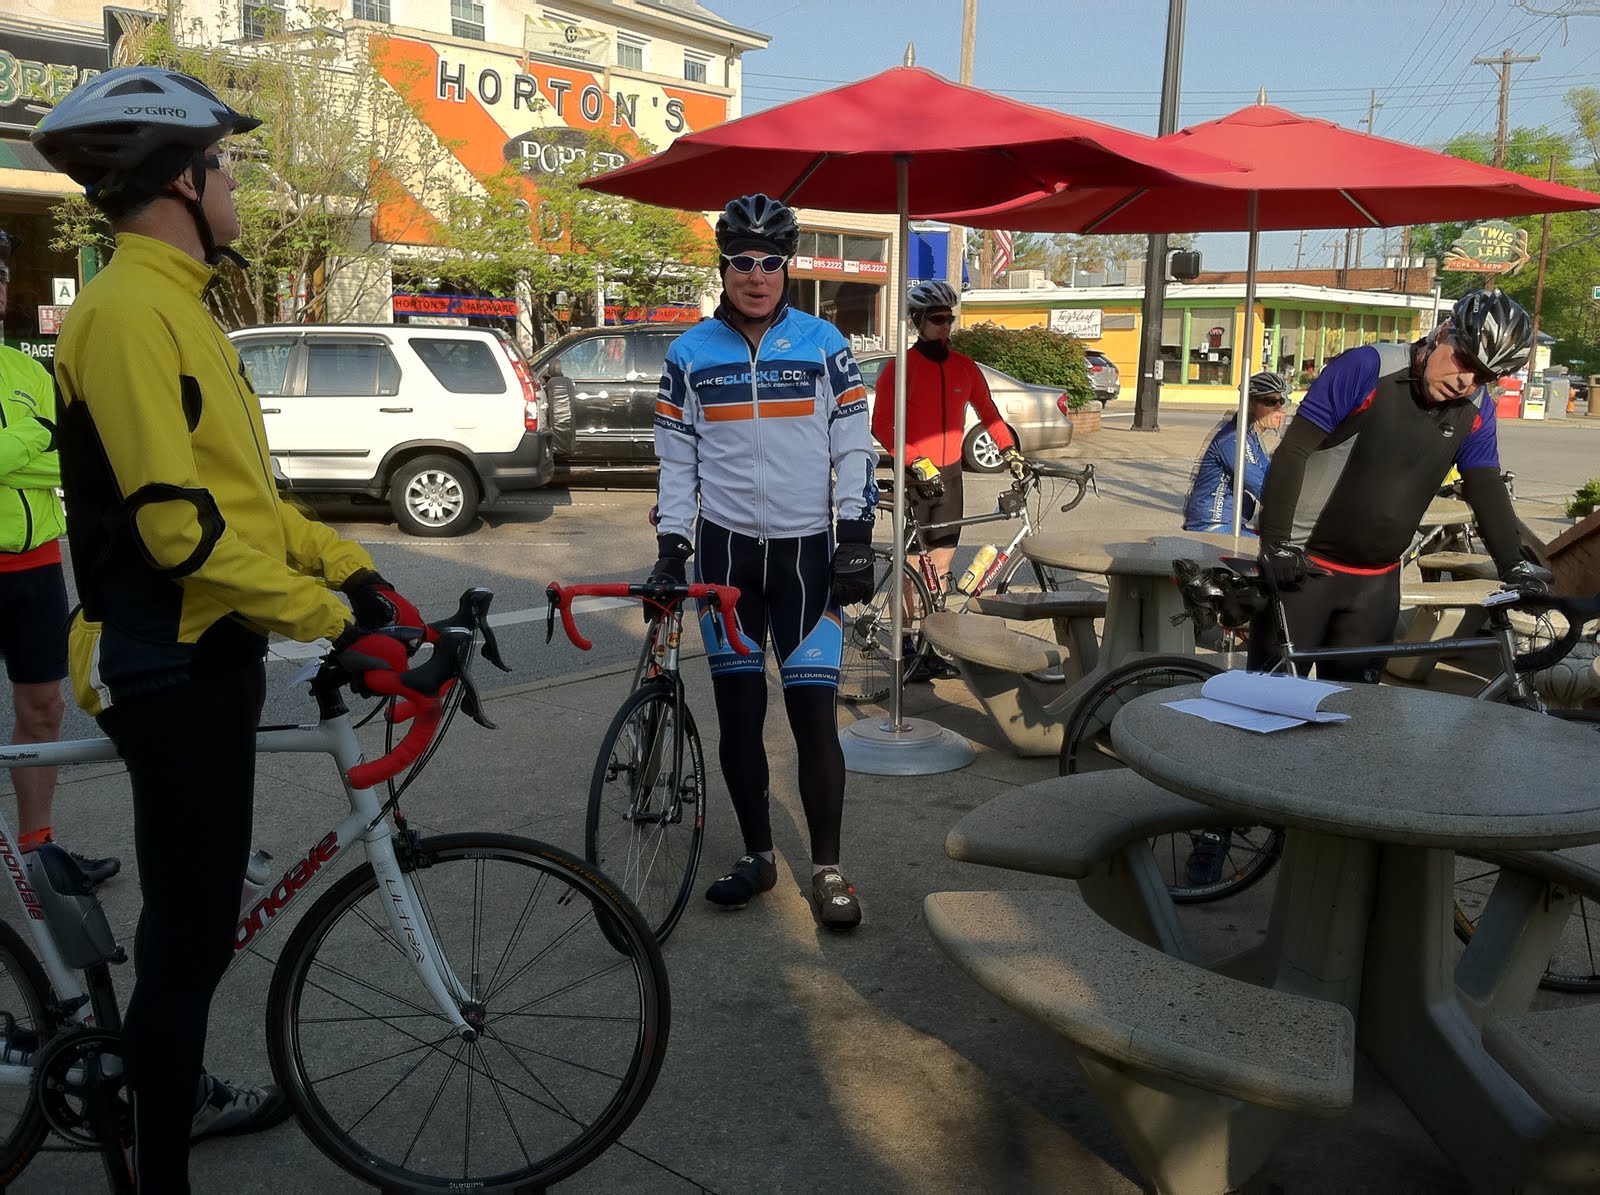 Sunday morning ride with The Louisville Bicycle Club